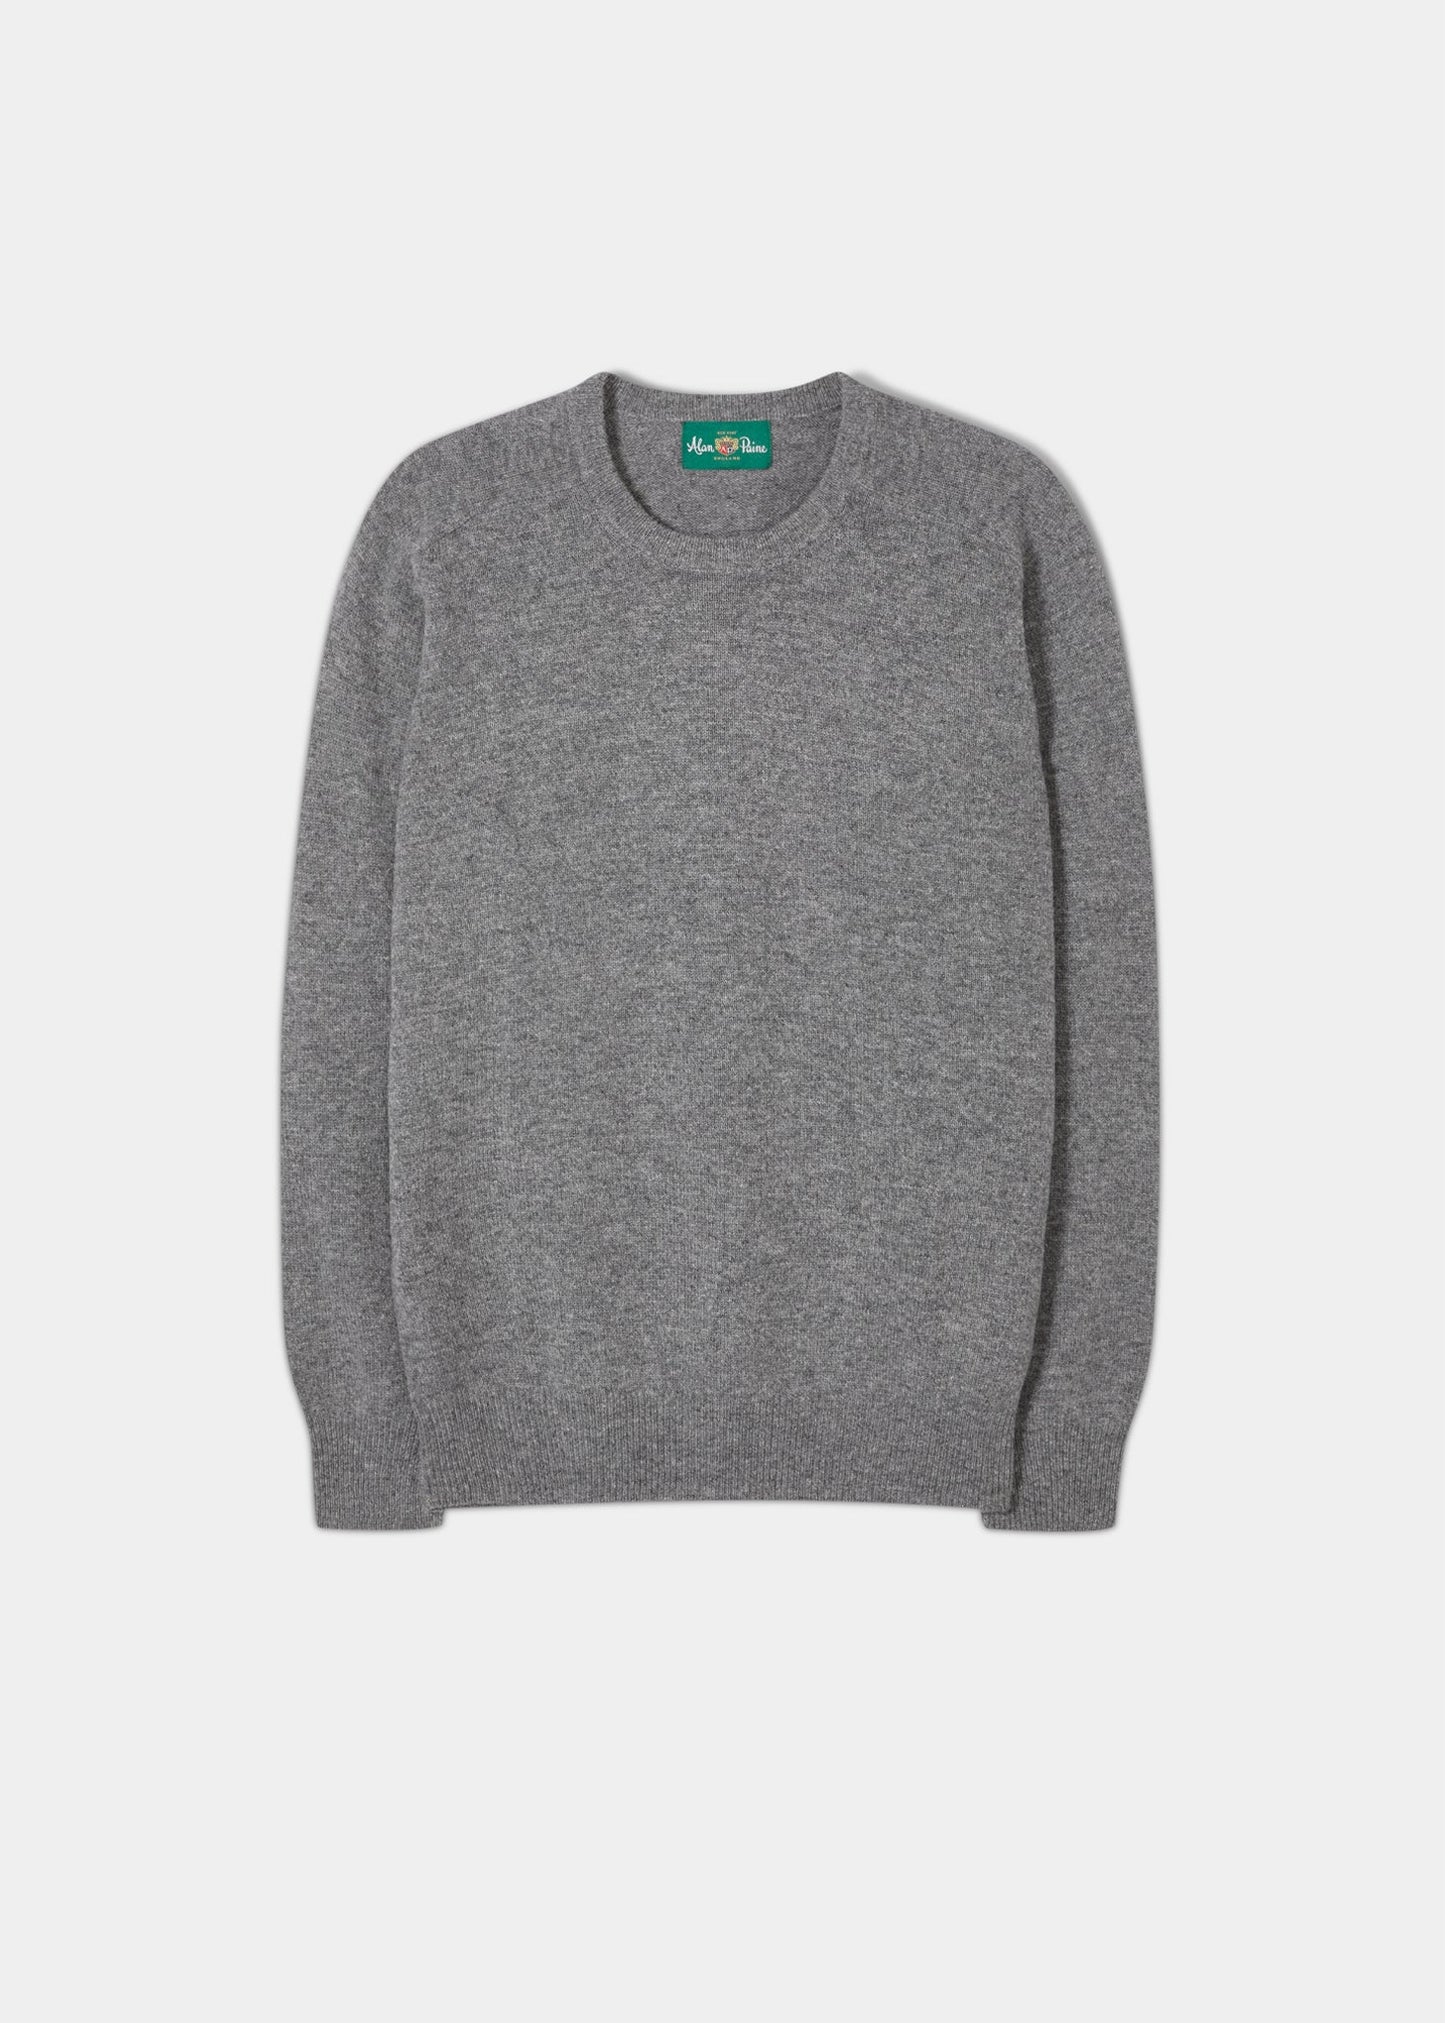 Dorset Lambswool Sweater in Grey Mix | Alan Paine USA